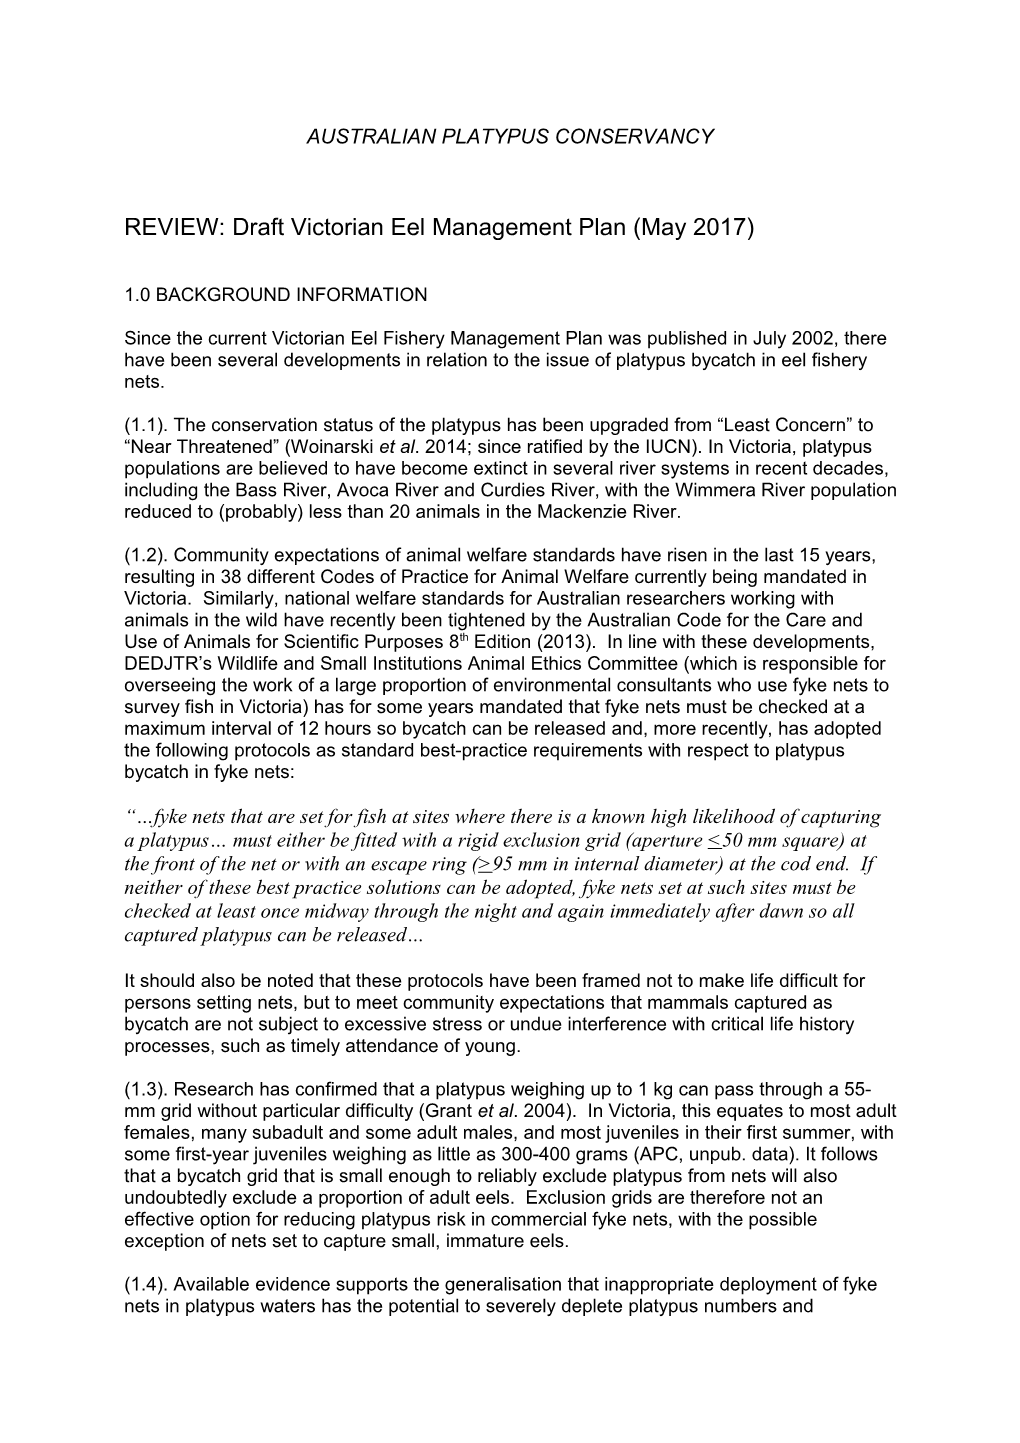 REVIEW: Draft Victorian Eel Management Plan (May 2017)